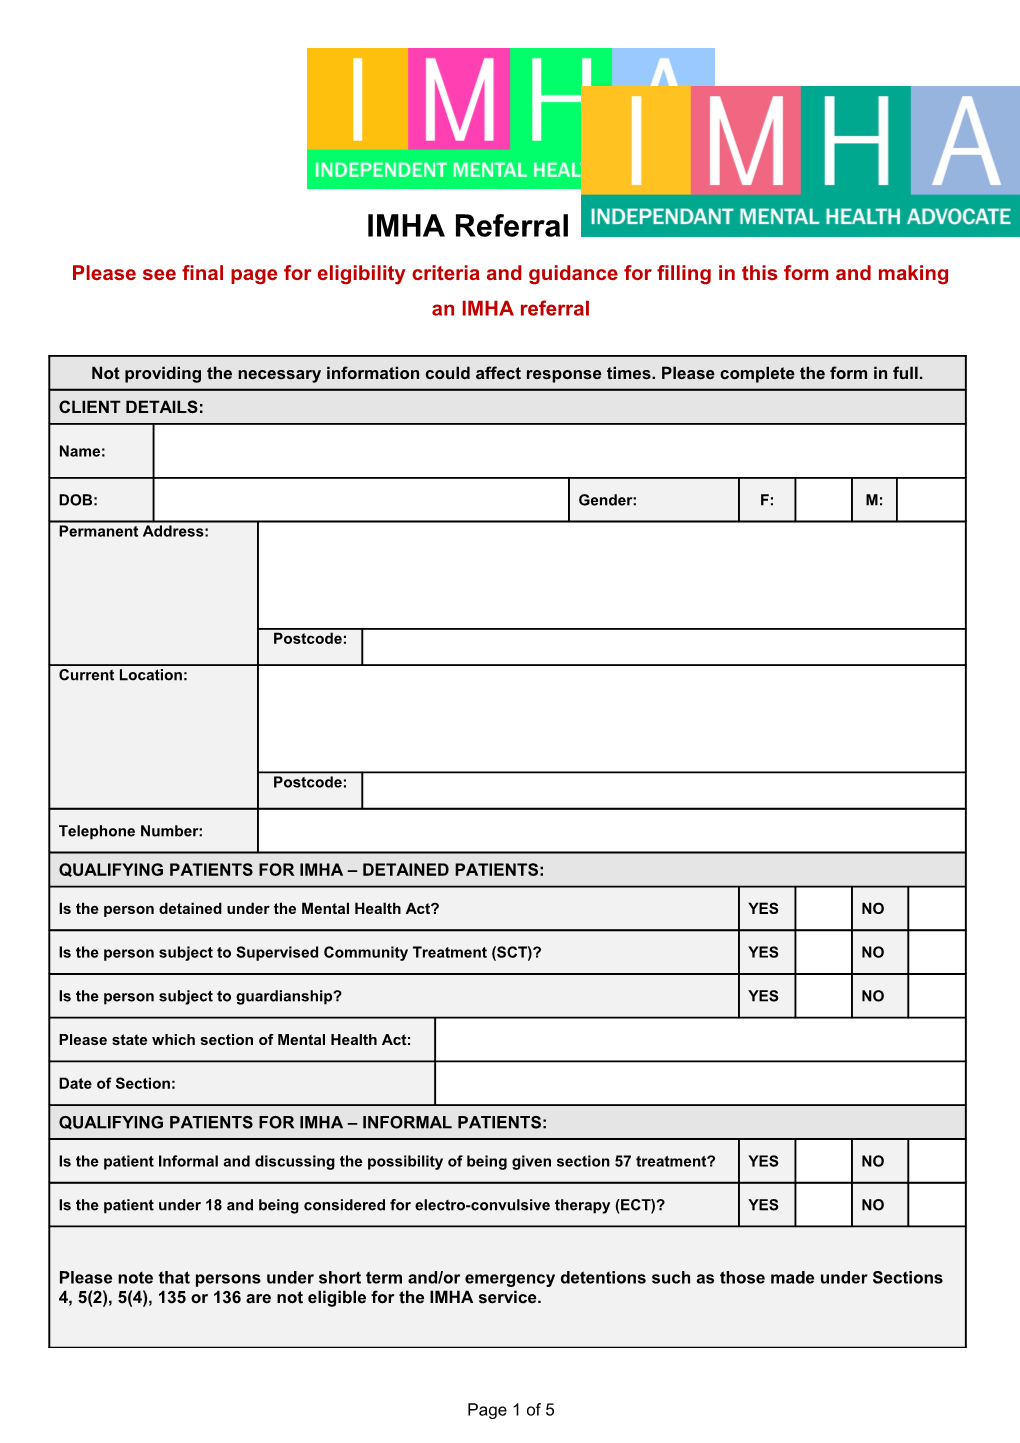 Please Ensure the Referral Form Is Signed Before Returning